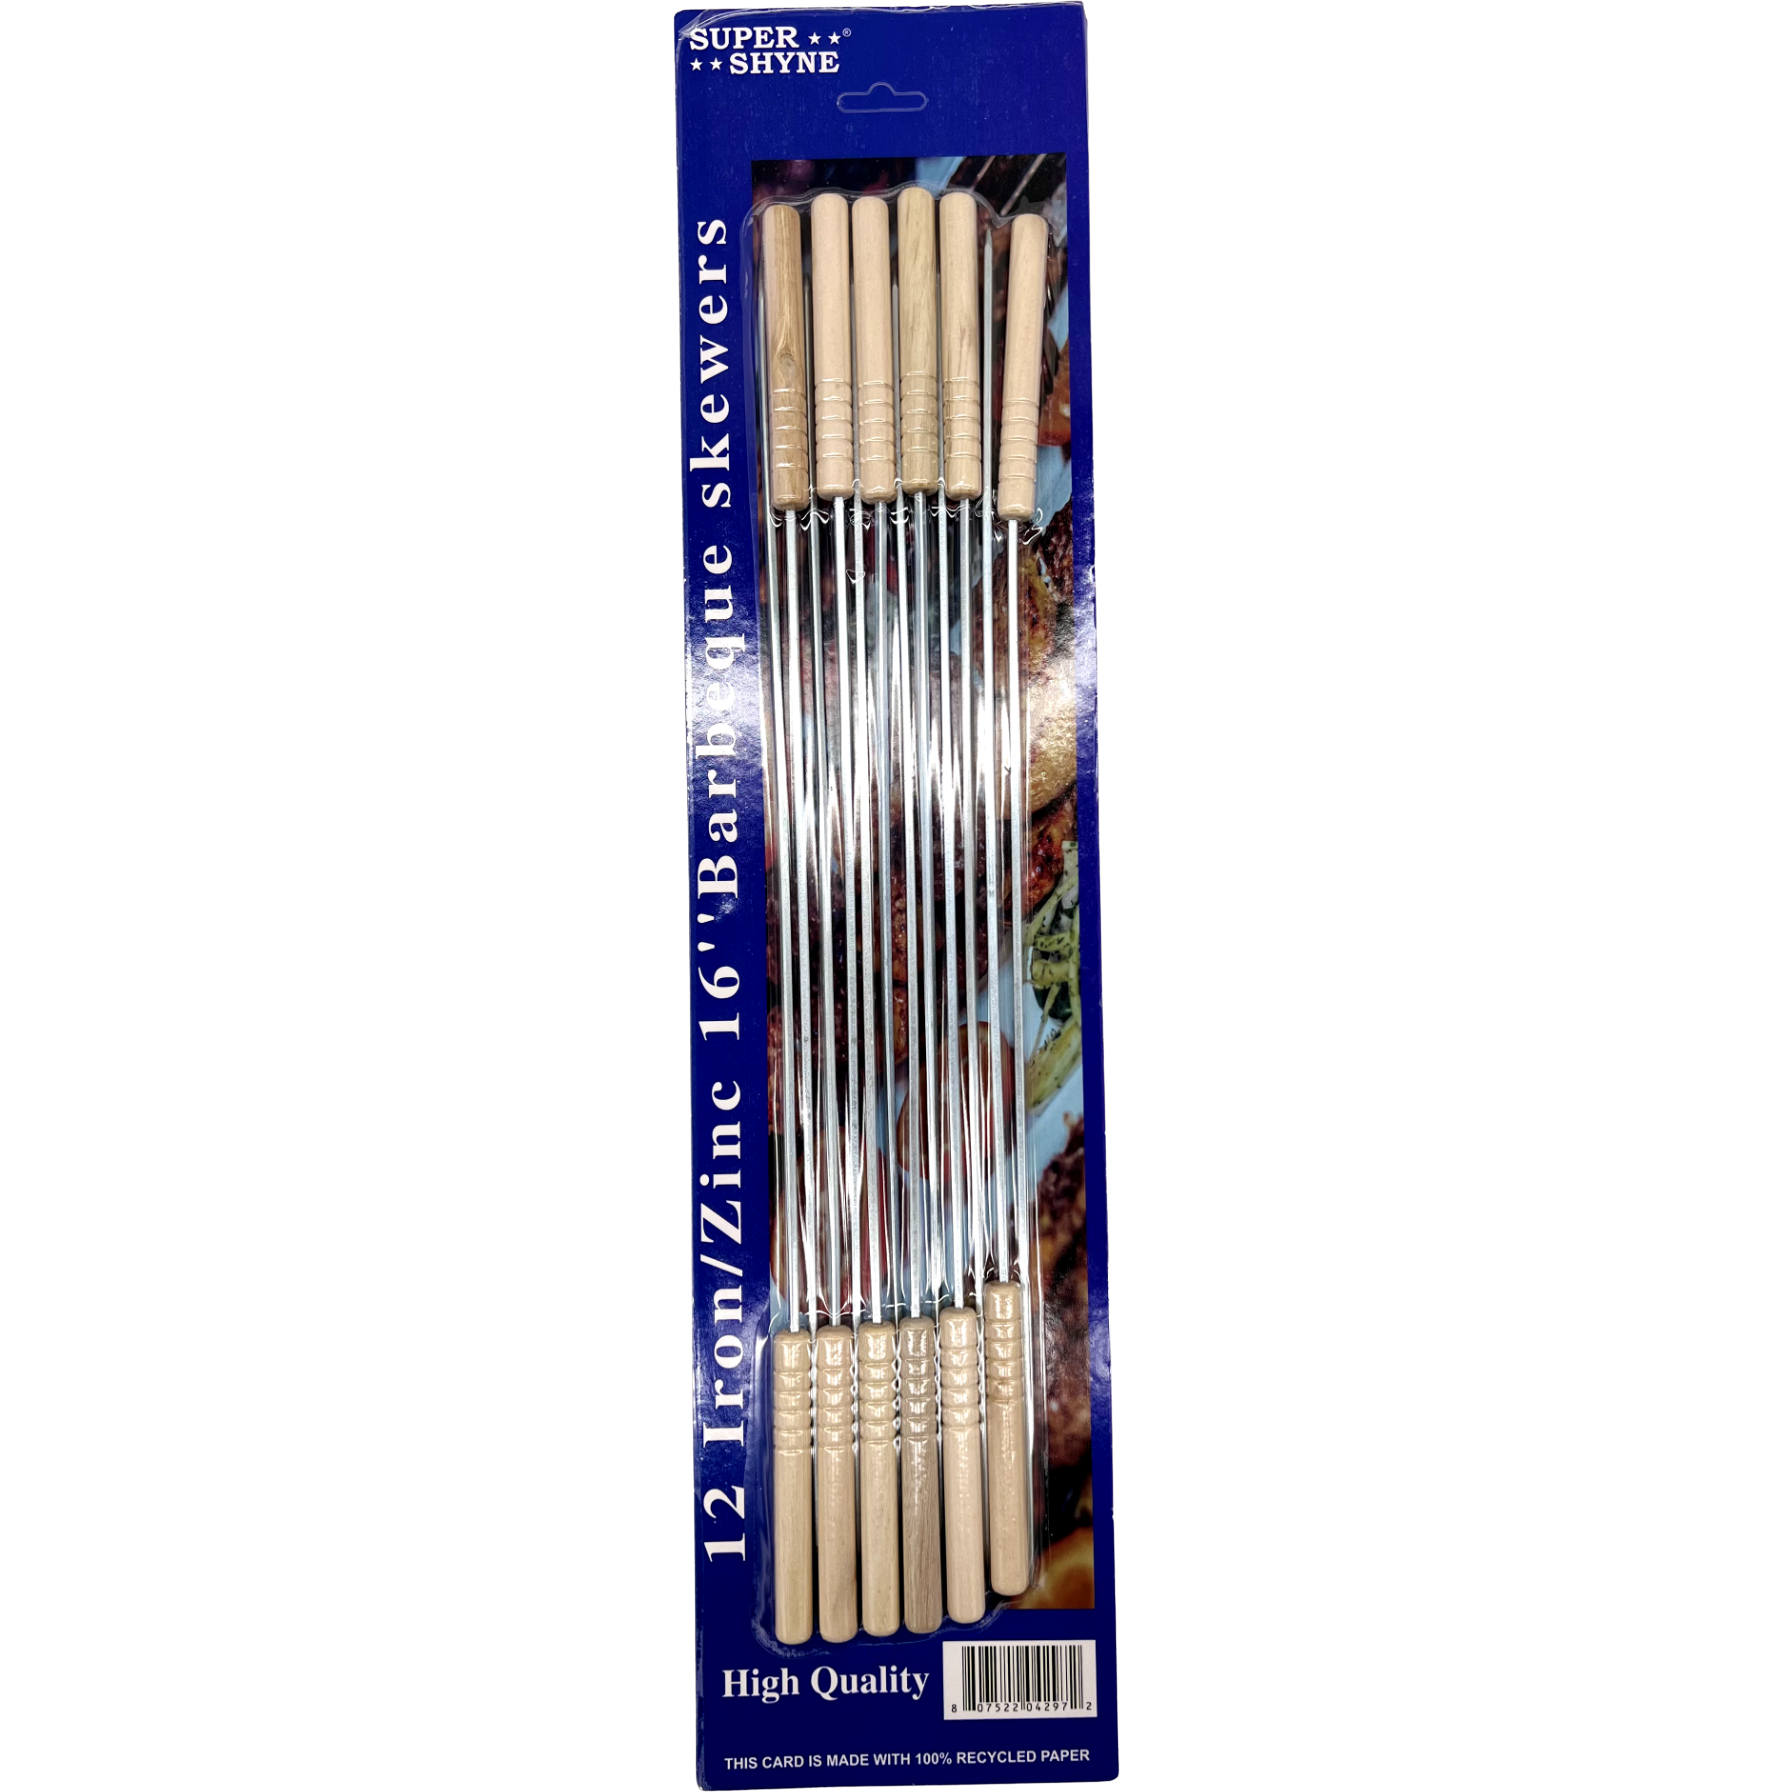 Pack of 5 - Super Shyne Barbeque Skewers - 12 Ct